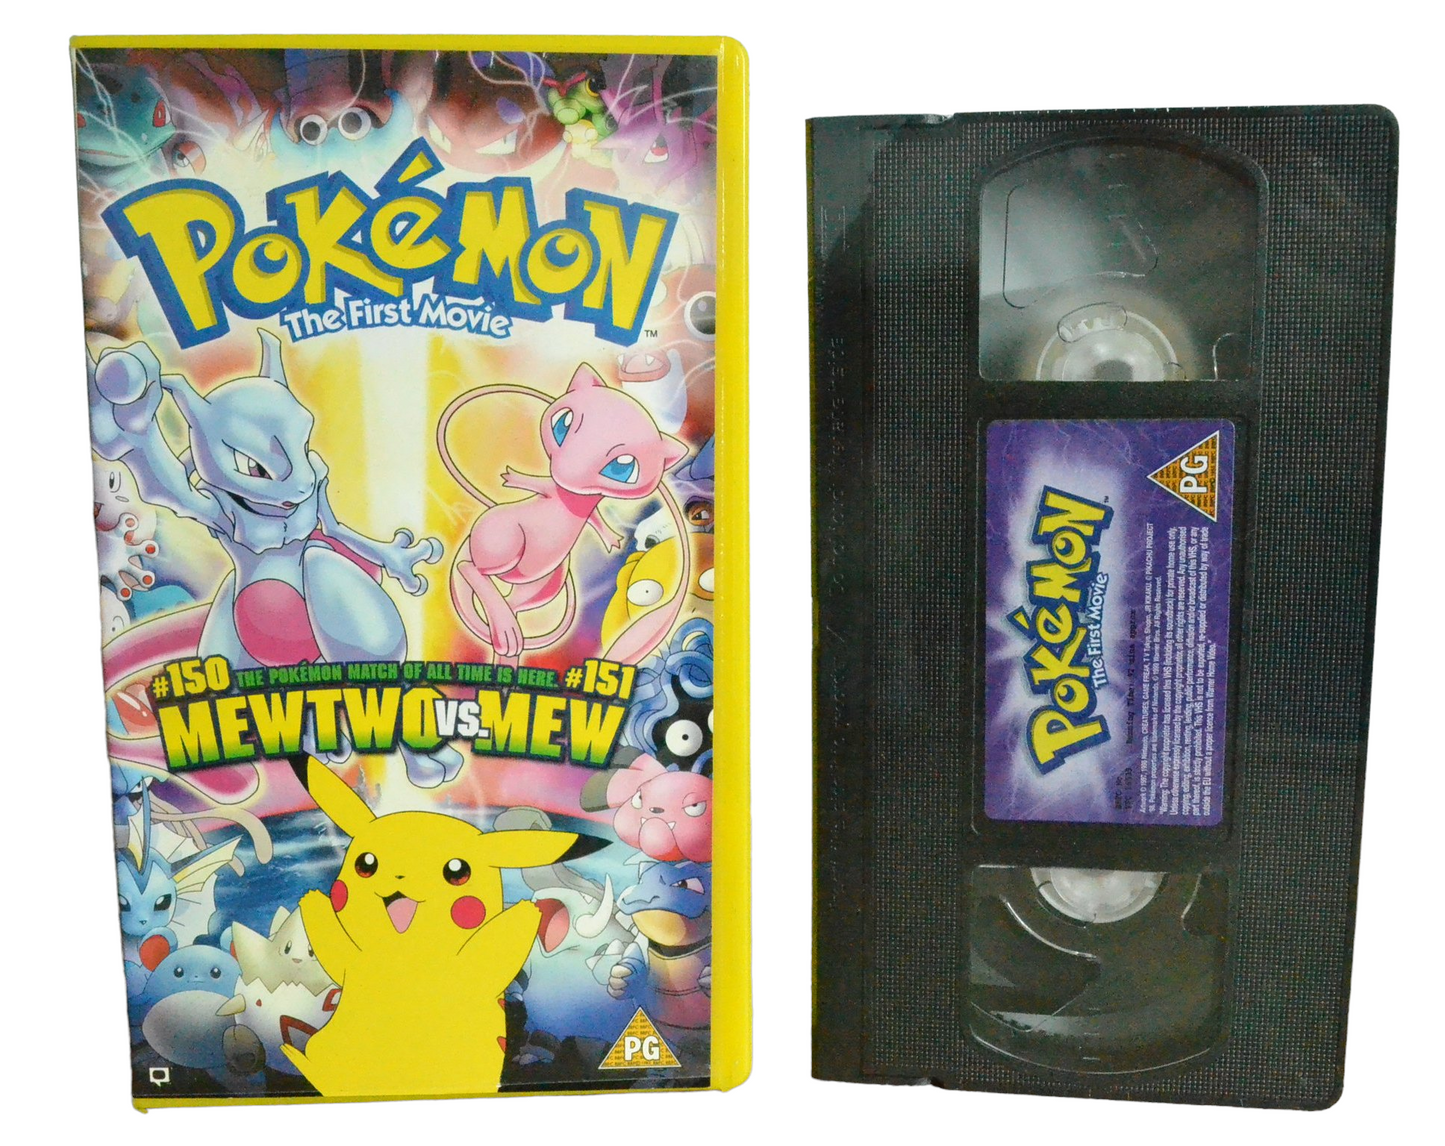 Pokemon The First Movie - Veronica Taylor - Warner Home Video - S018020 - Brand New Sealed - Pal - VHS-